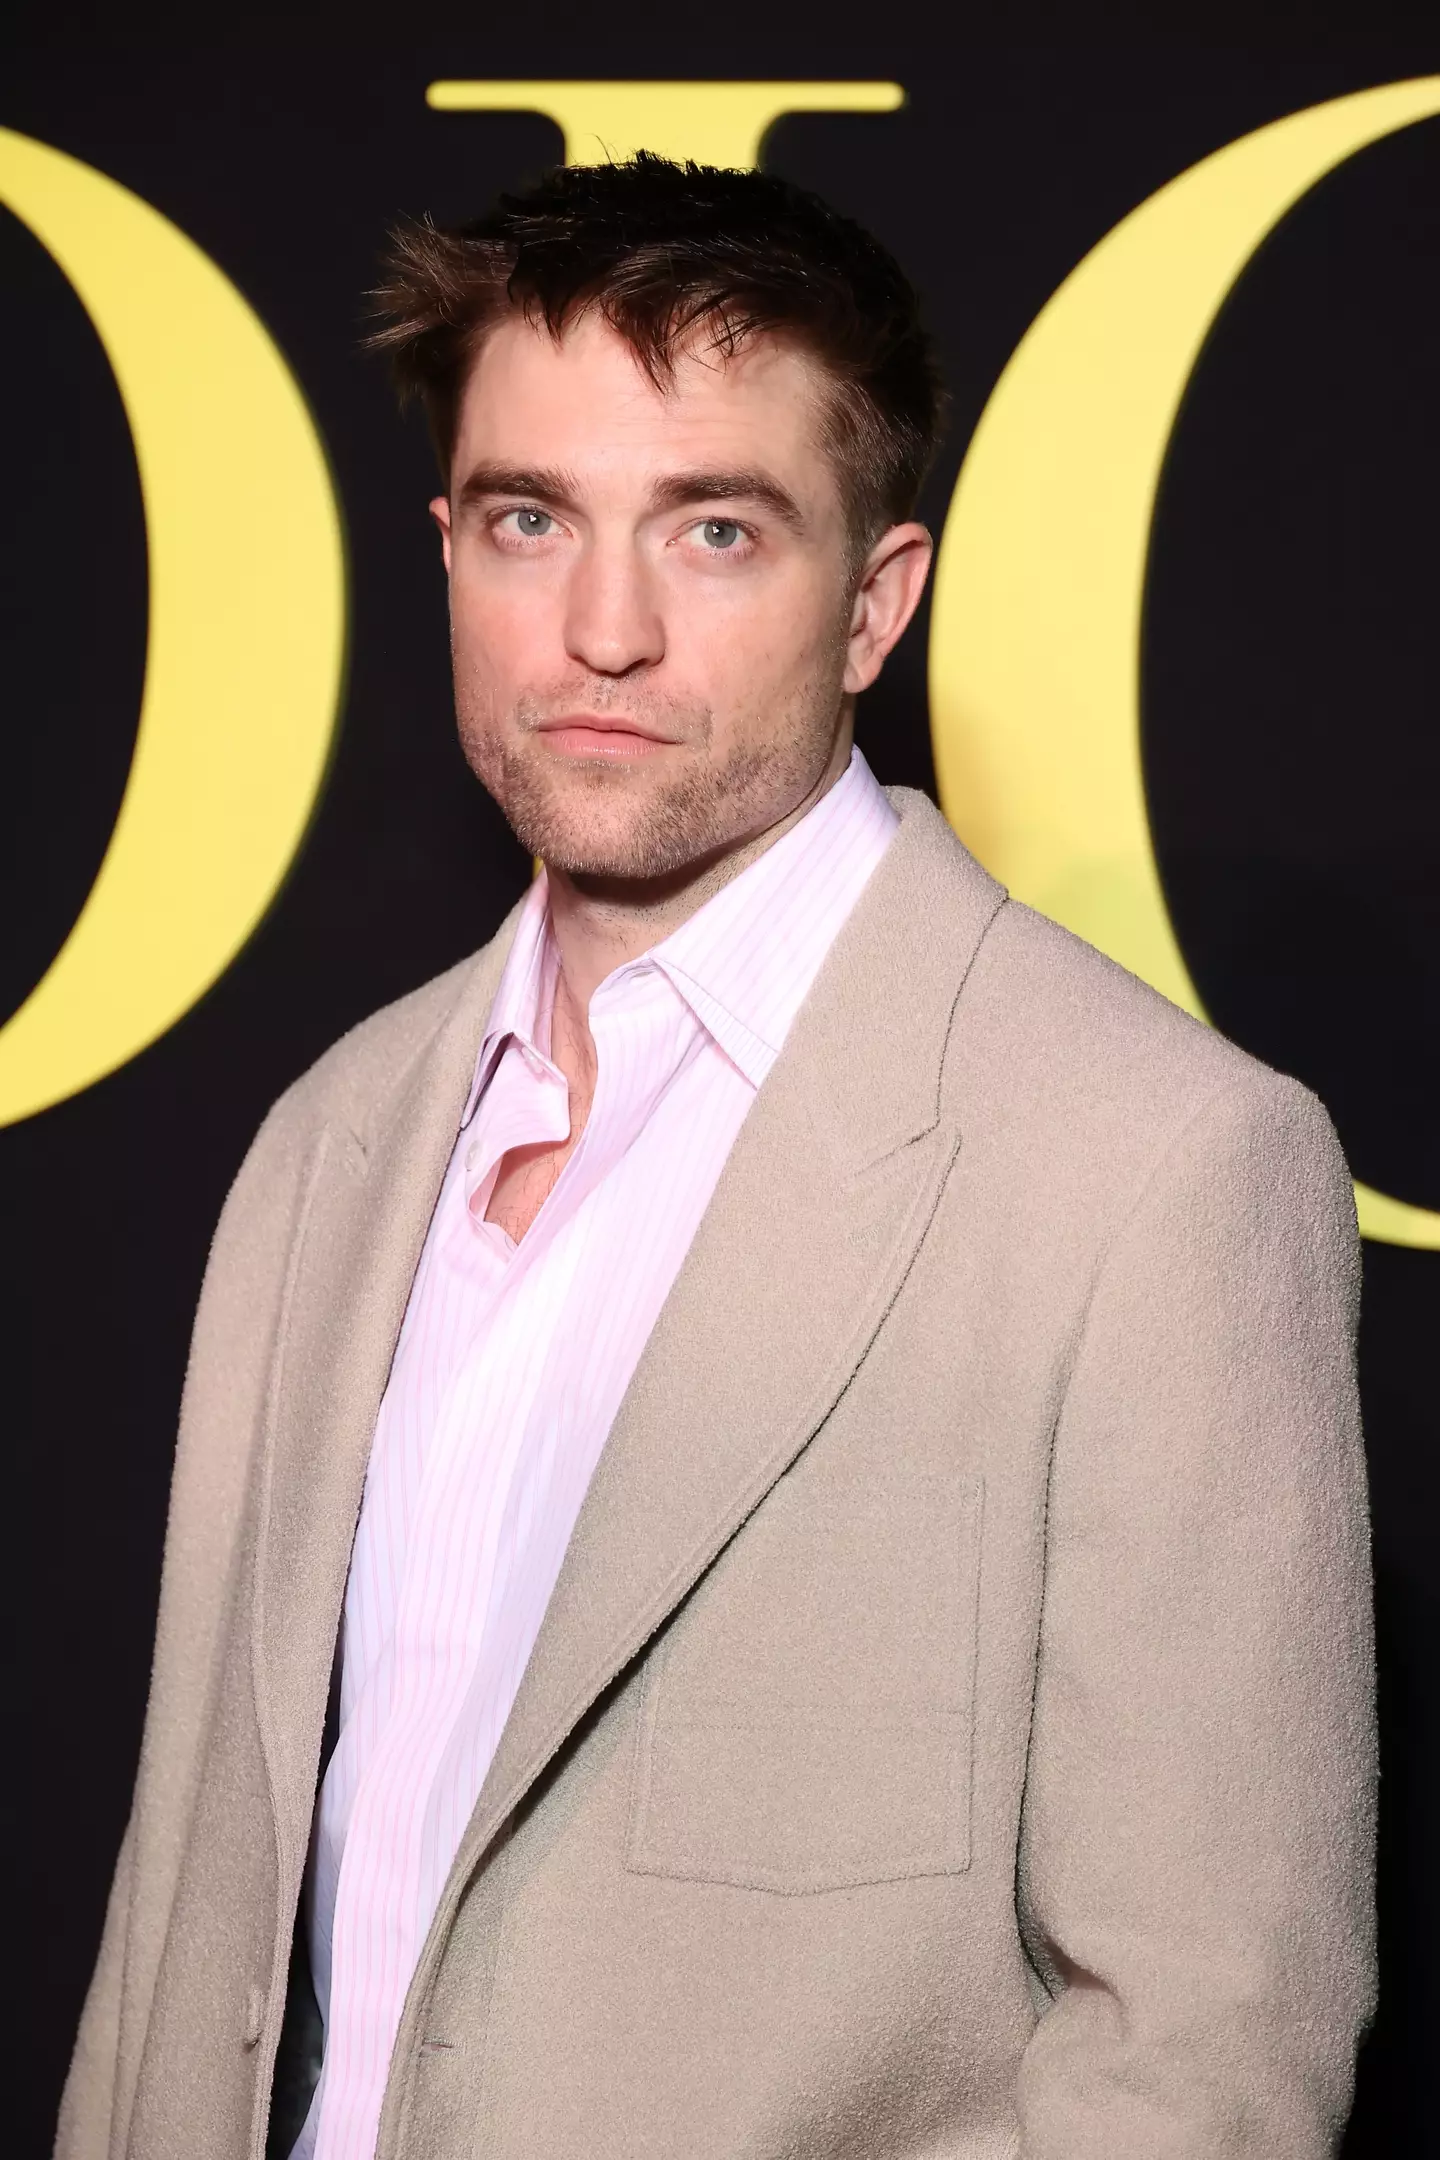 Robert Pattinson was set to take on the starring role in the Netflix film that has since been scrapped.